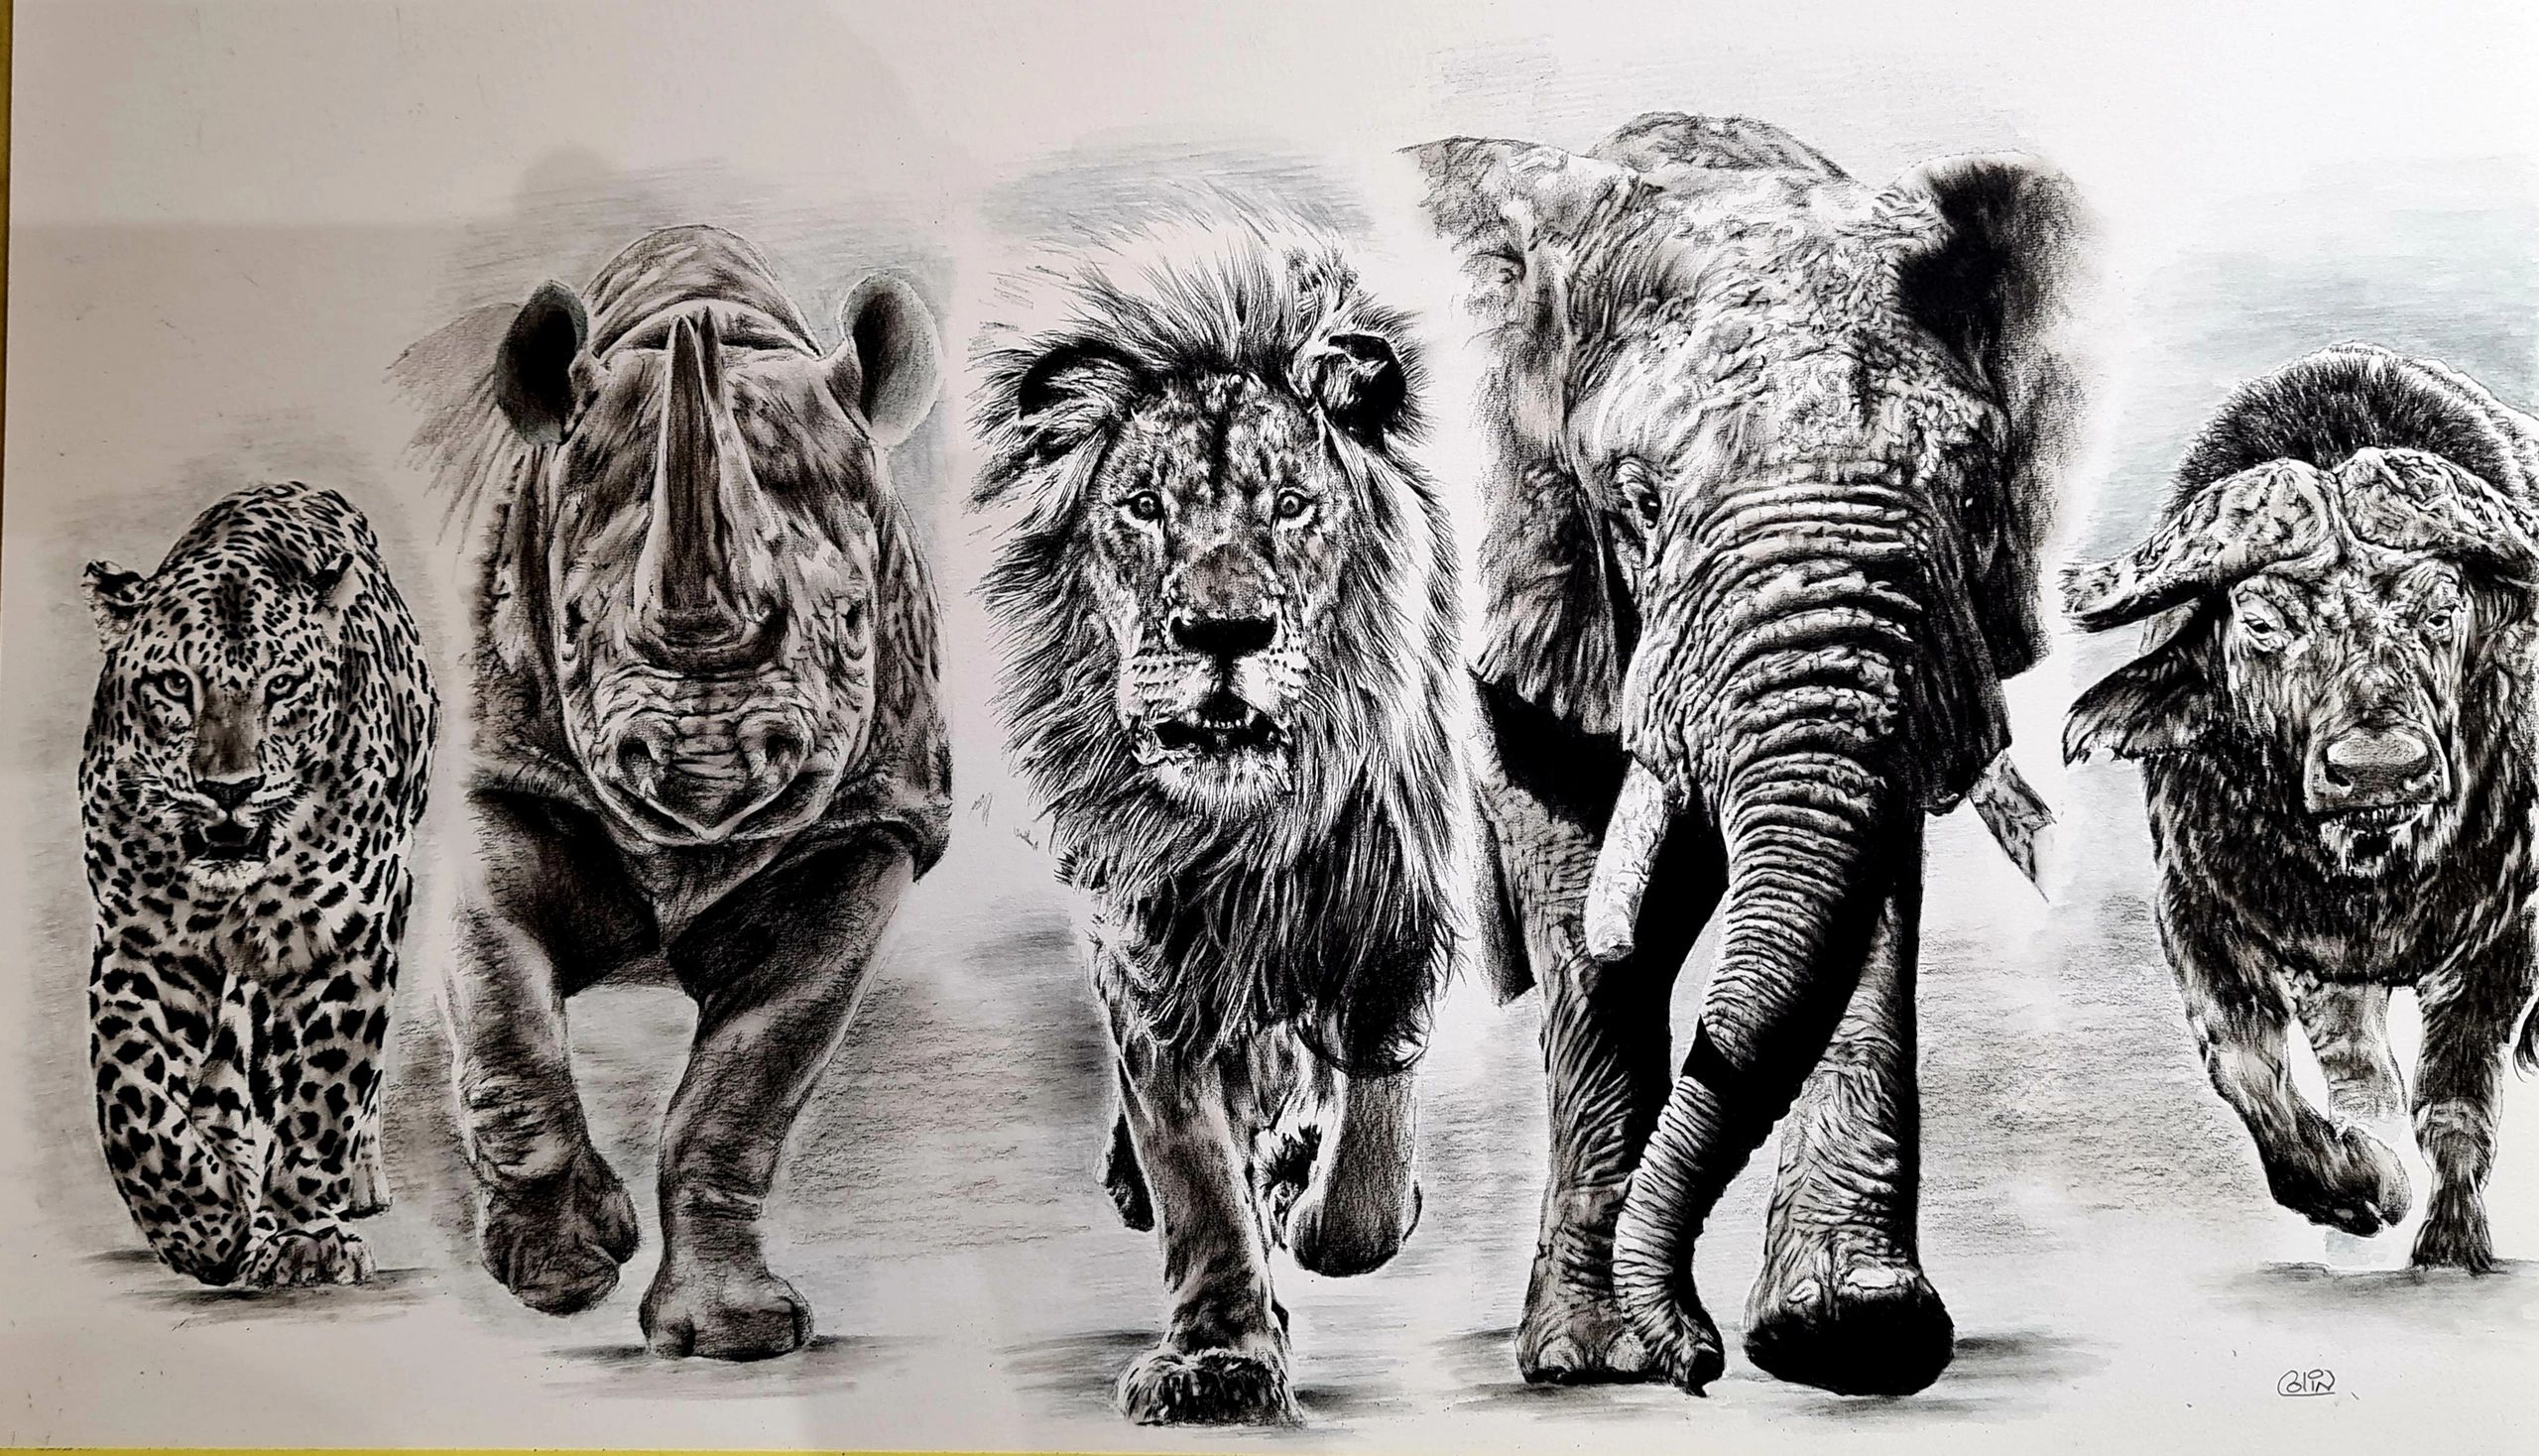 A3 Pencil and Charcoal commission drawing of the big 5.